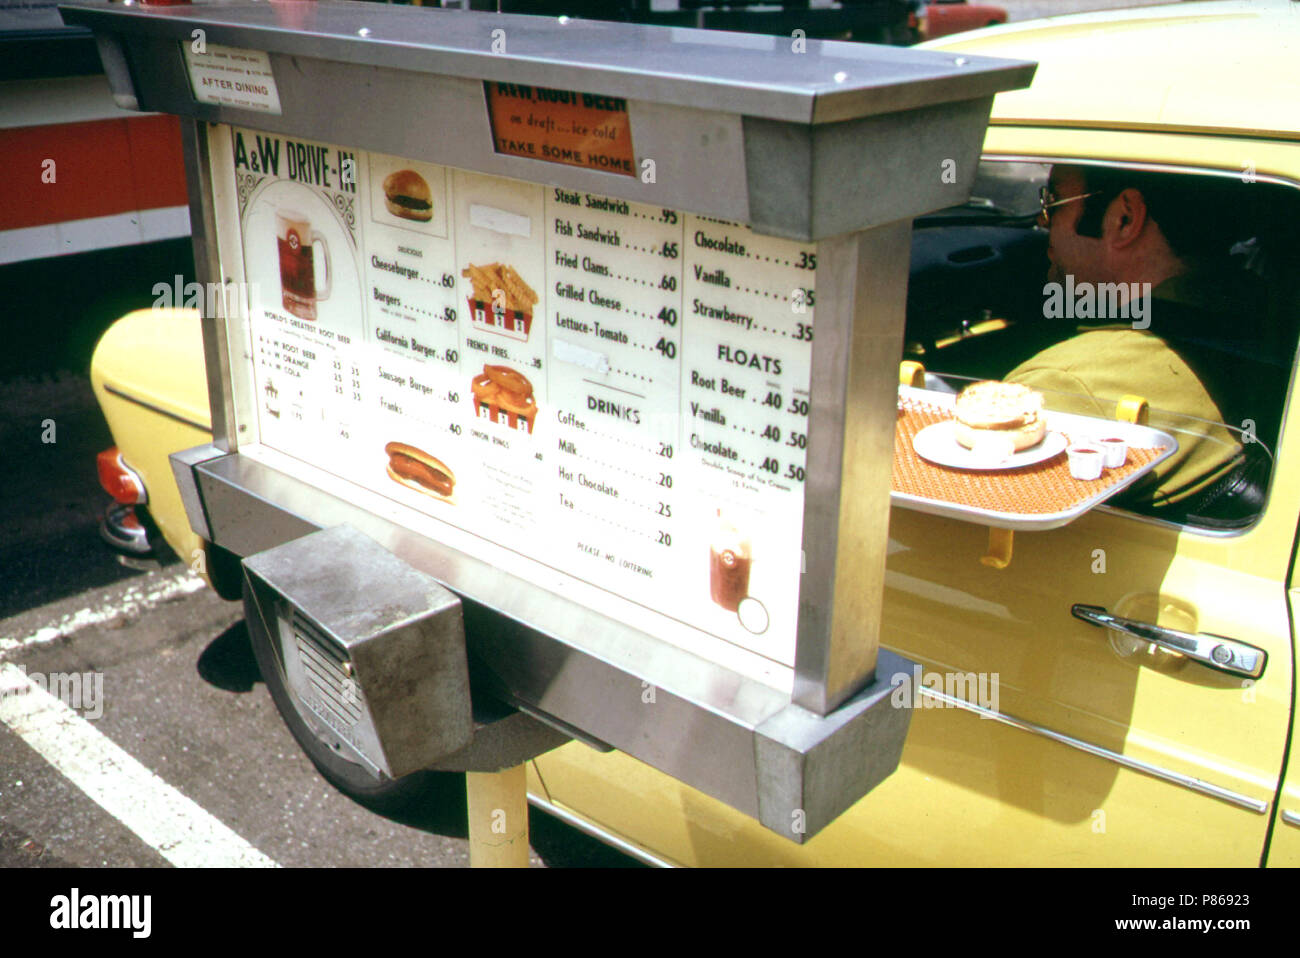 Early 1970s A&W Drive-In Restaurant 06 1973 Stock Photo